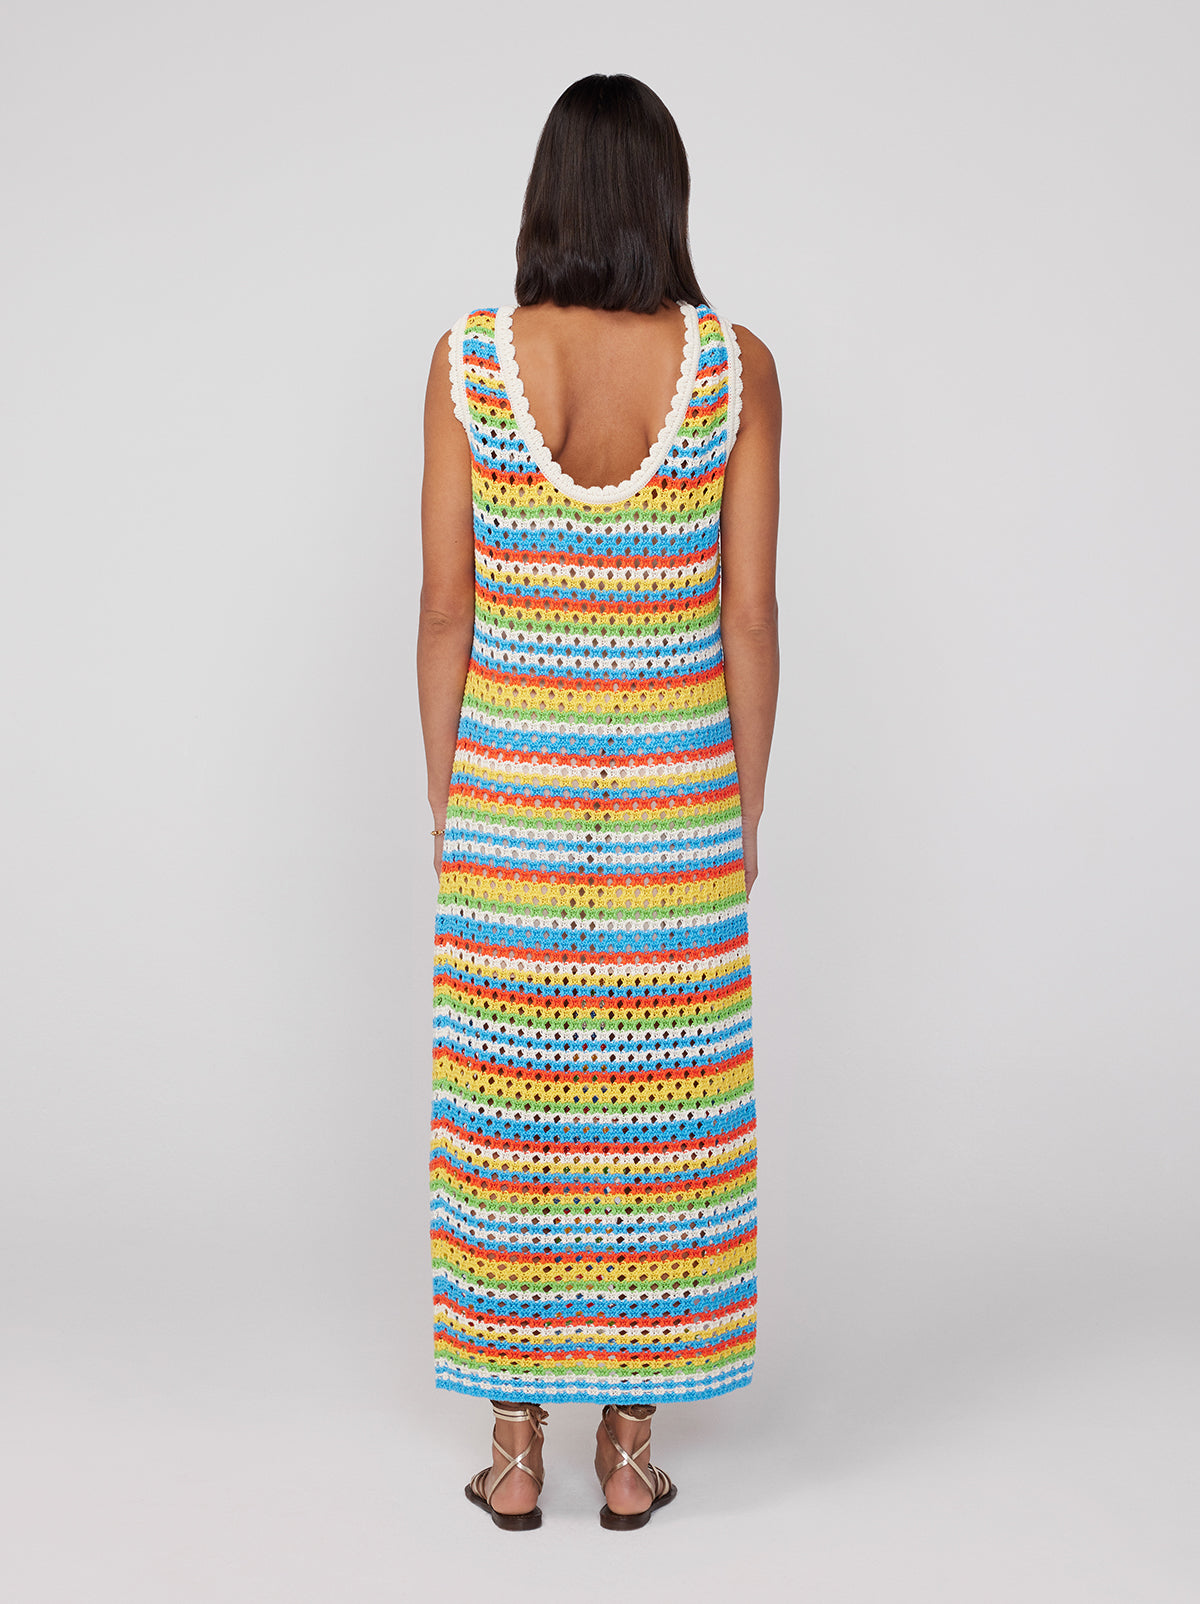 Bunty Blue Stripe Crochet Knit Dress By KITRI Studio with a flattering fit around the chest and straight fit in the skirt. An ideal beach midi dress to throw over a swimsuit it features a summary rainbow pattern with colourful horizontal lines in 100% cotton crochet knitted design